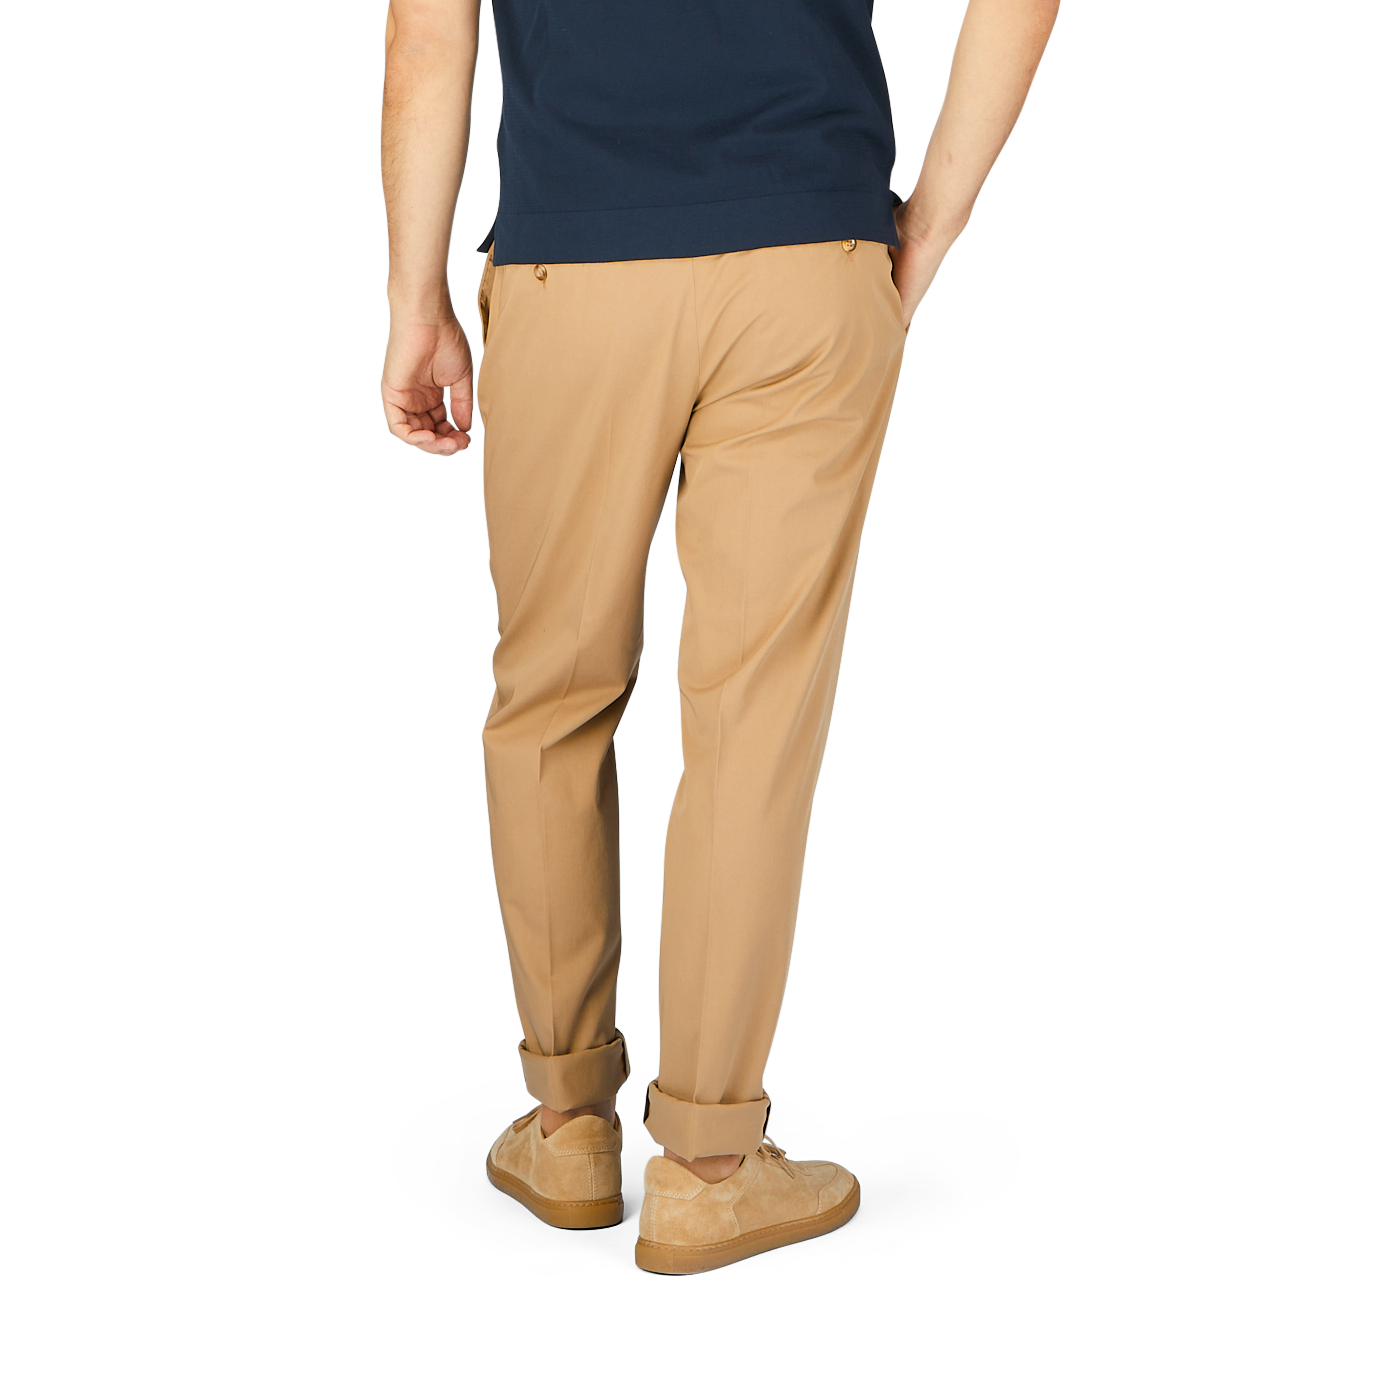 Man standing in a half-body profile view, wearing a navy blue t-shirt and beige Incotex Cotton Stretch Regular Fit chinos with tan shoes, against a plain background.